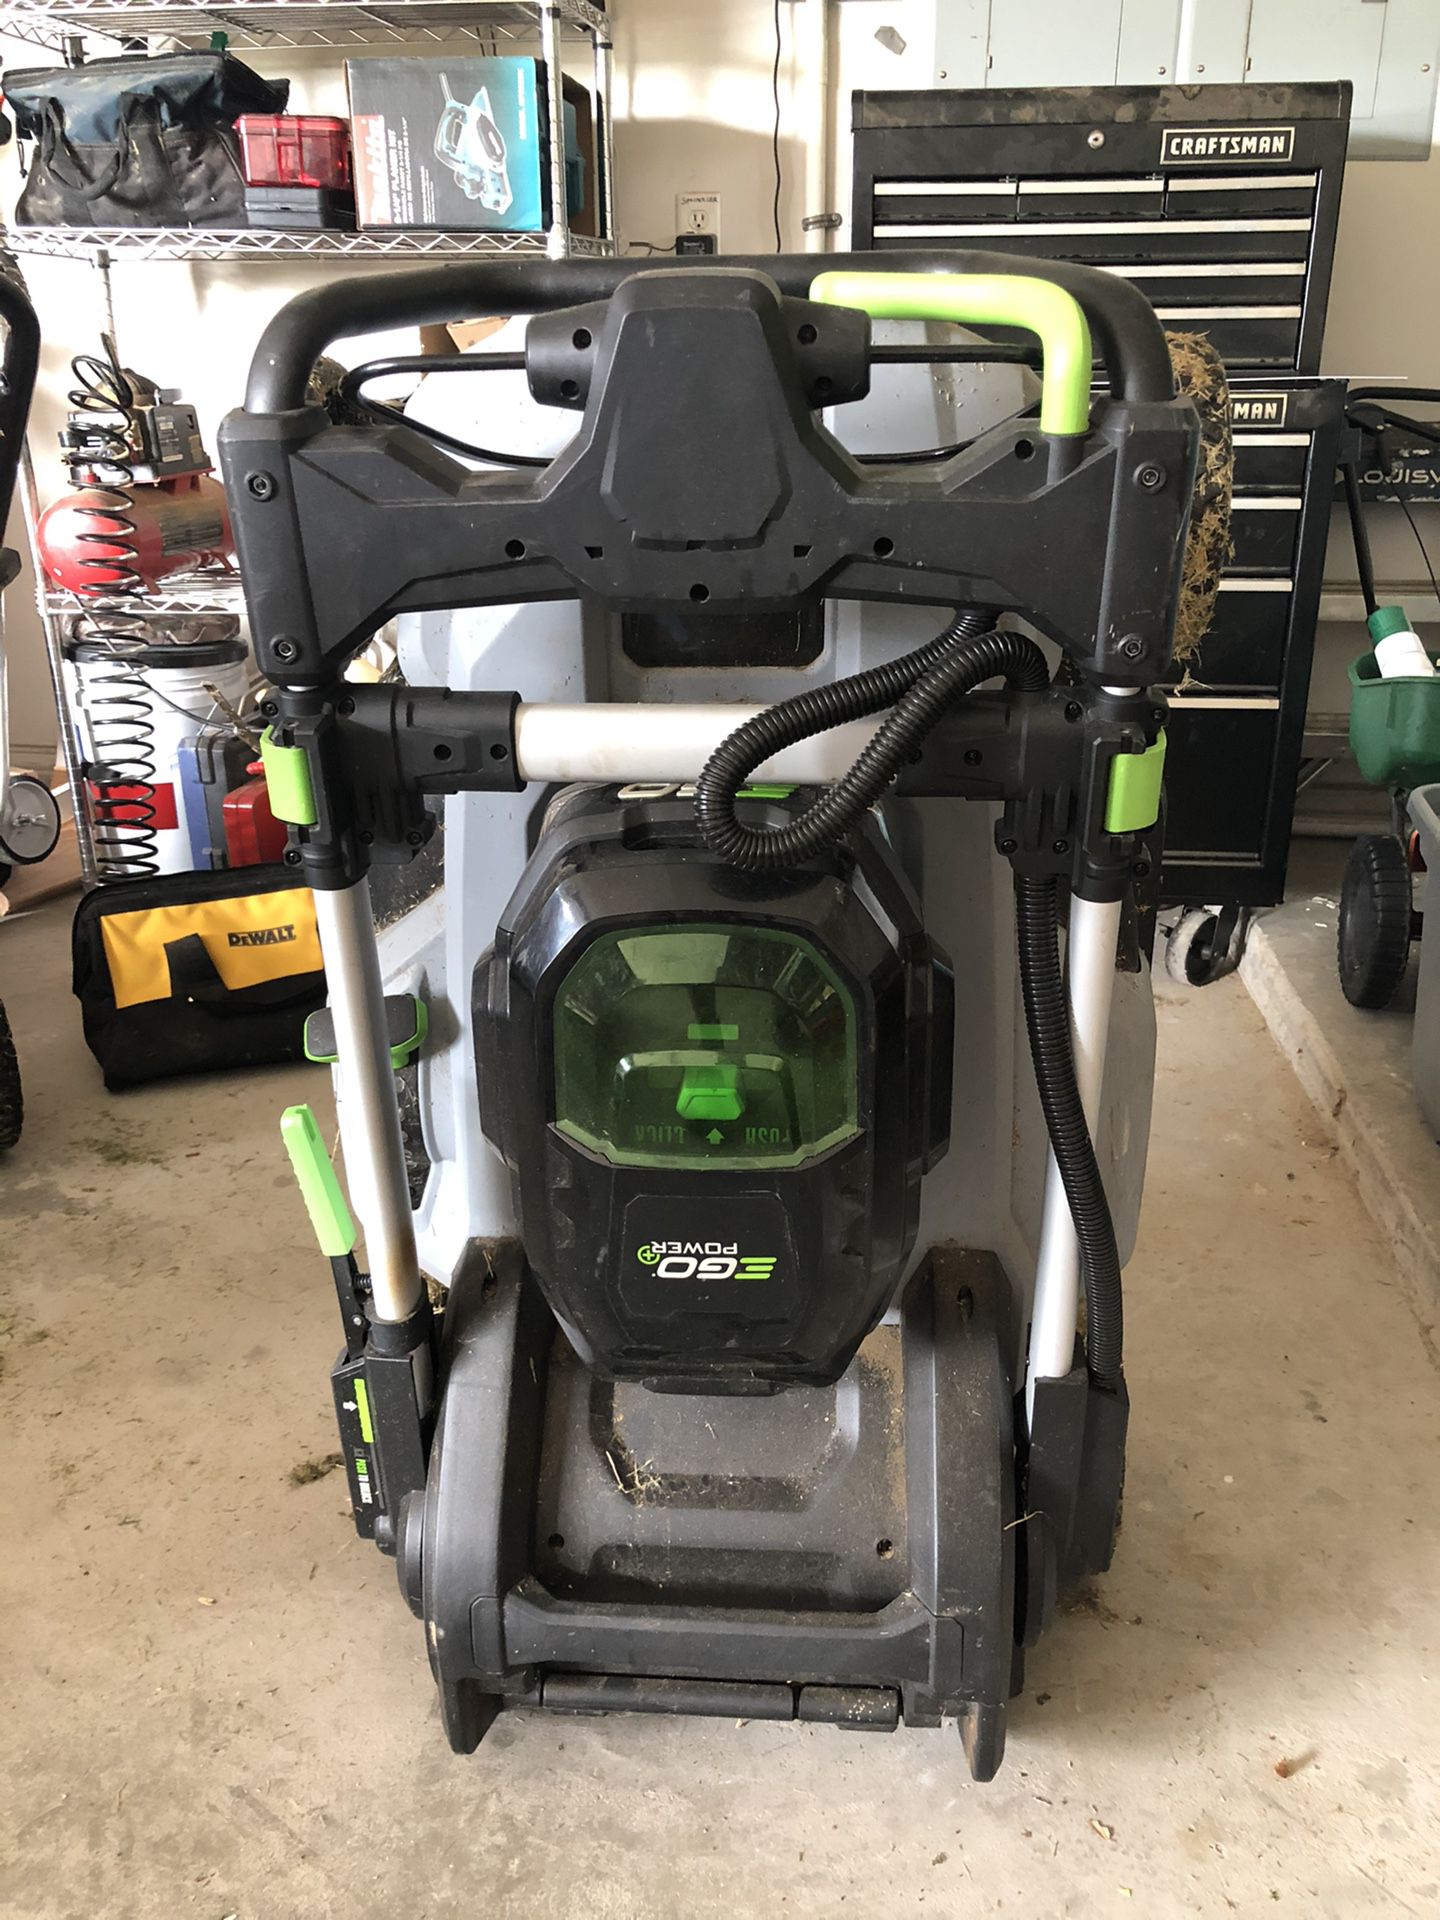 Ego mower with bag